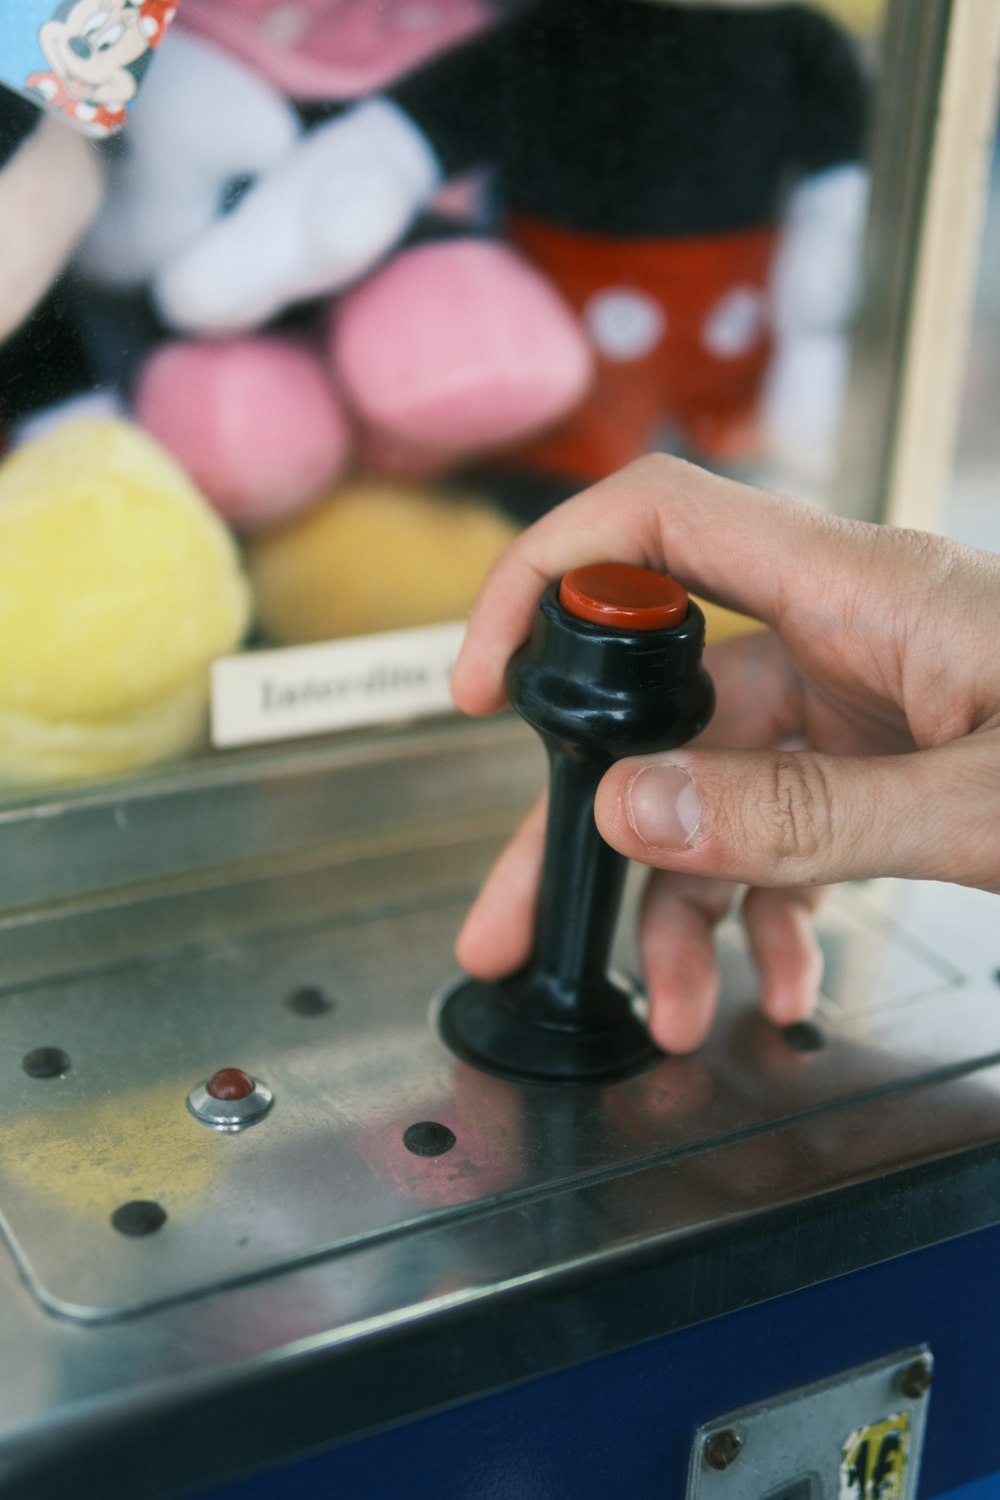 a person is pressing a button on a machine